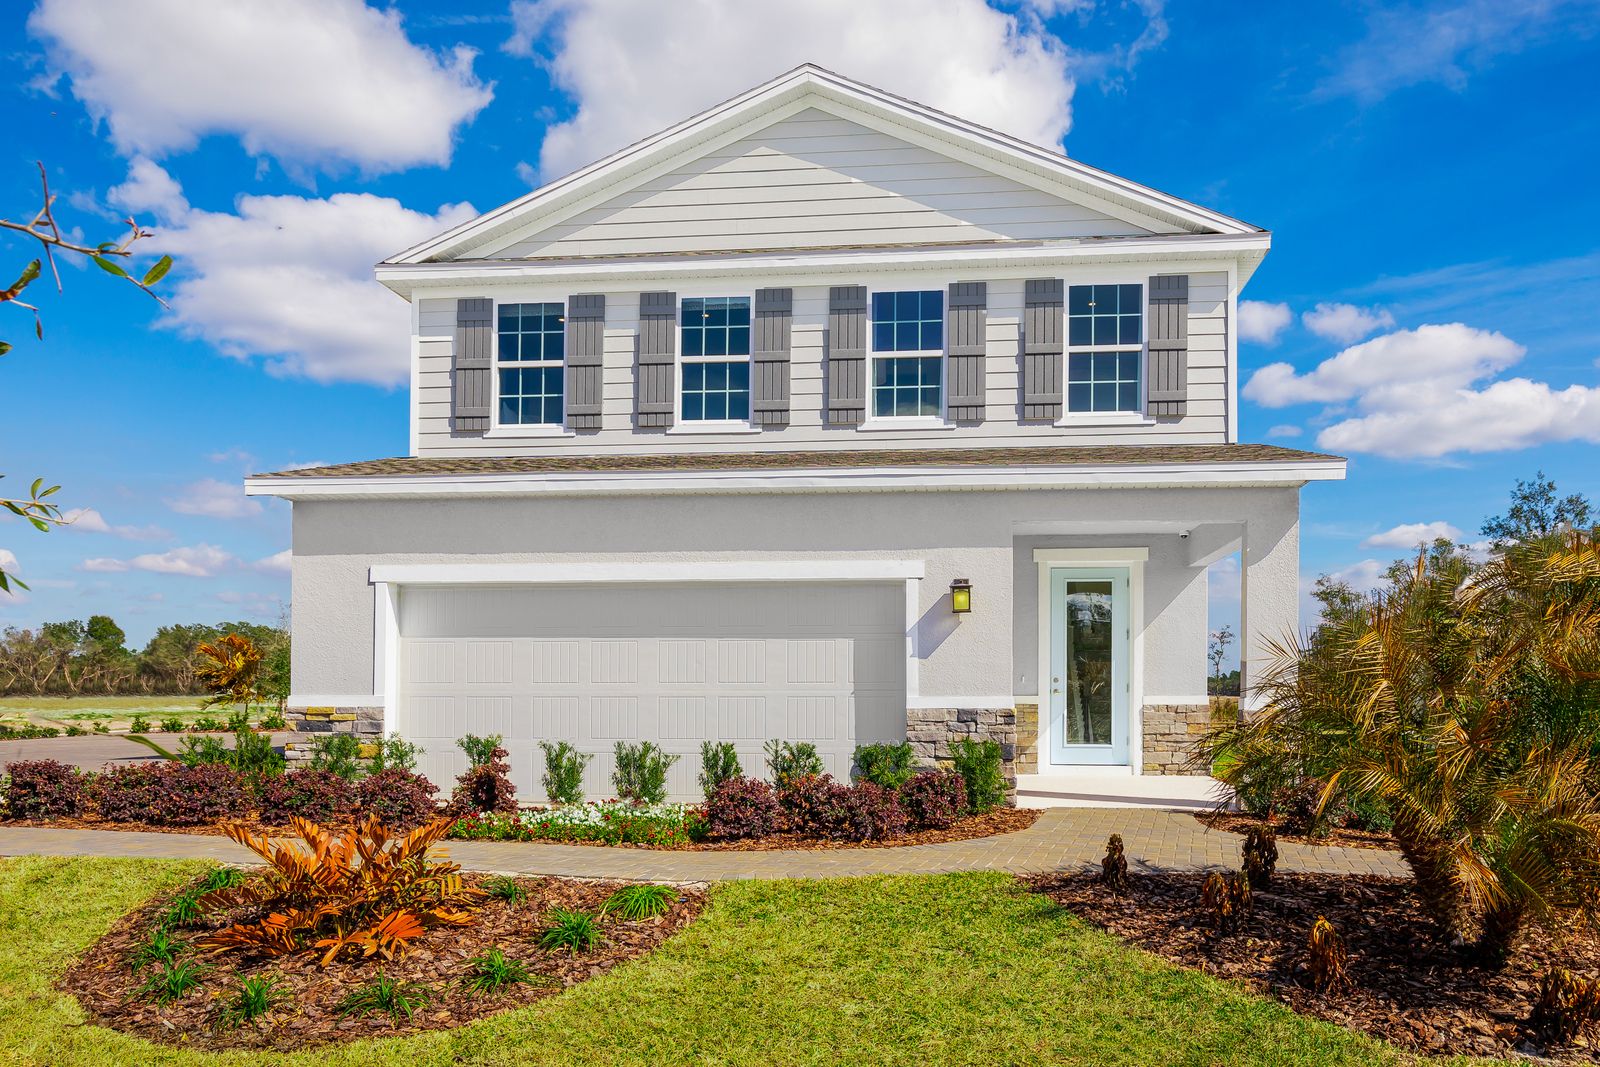 Welcome Home to Summerwoods in Parrish Florida